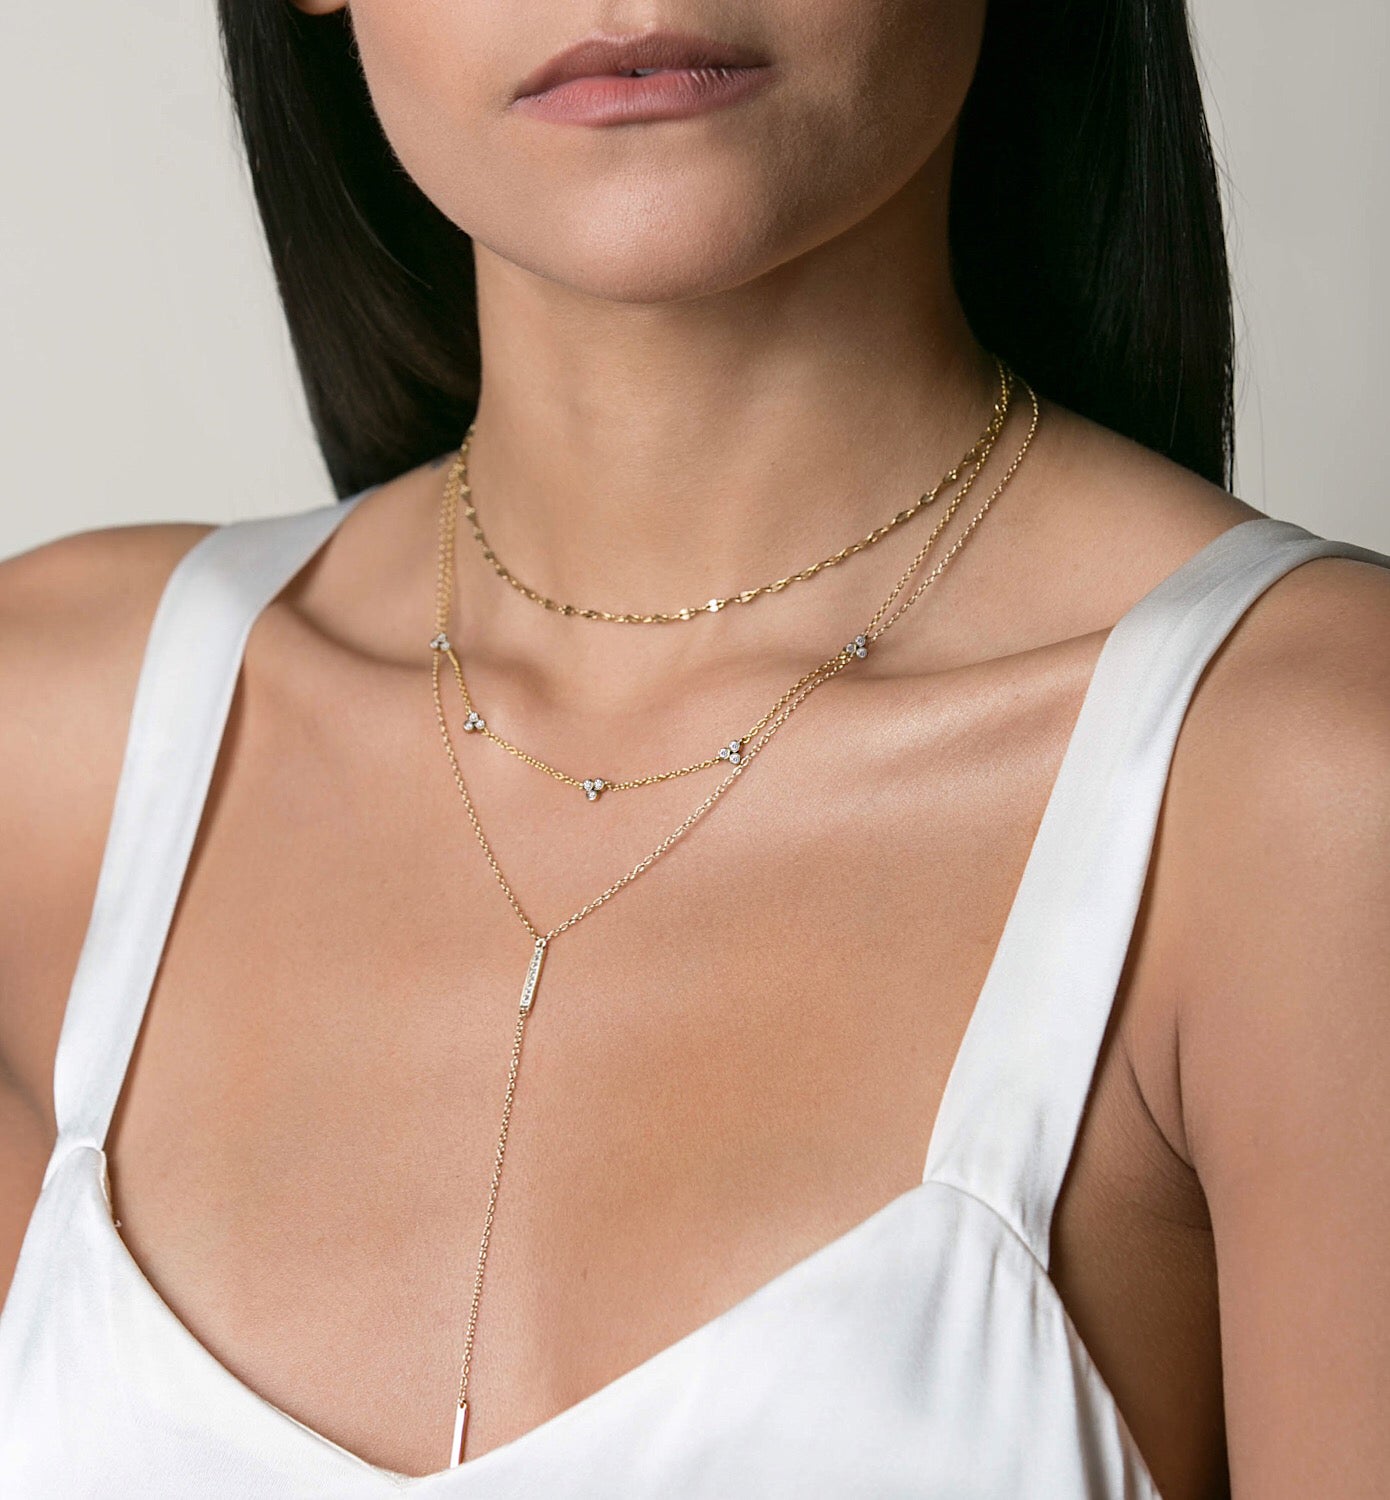 Gigi Gold Freshwater Pearls Necklace or Choker, Choose Your Length